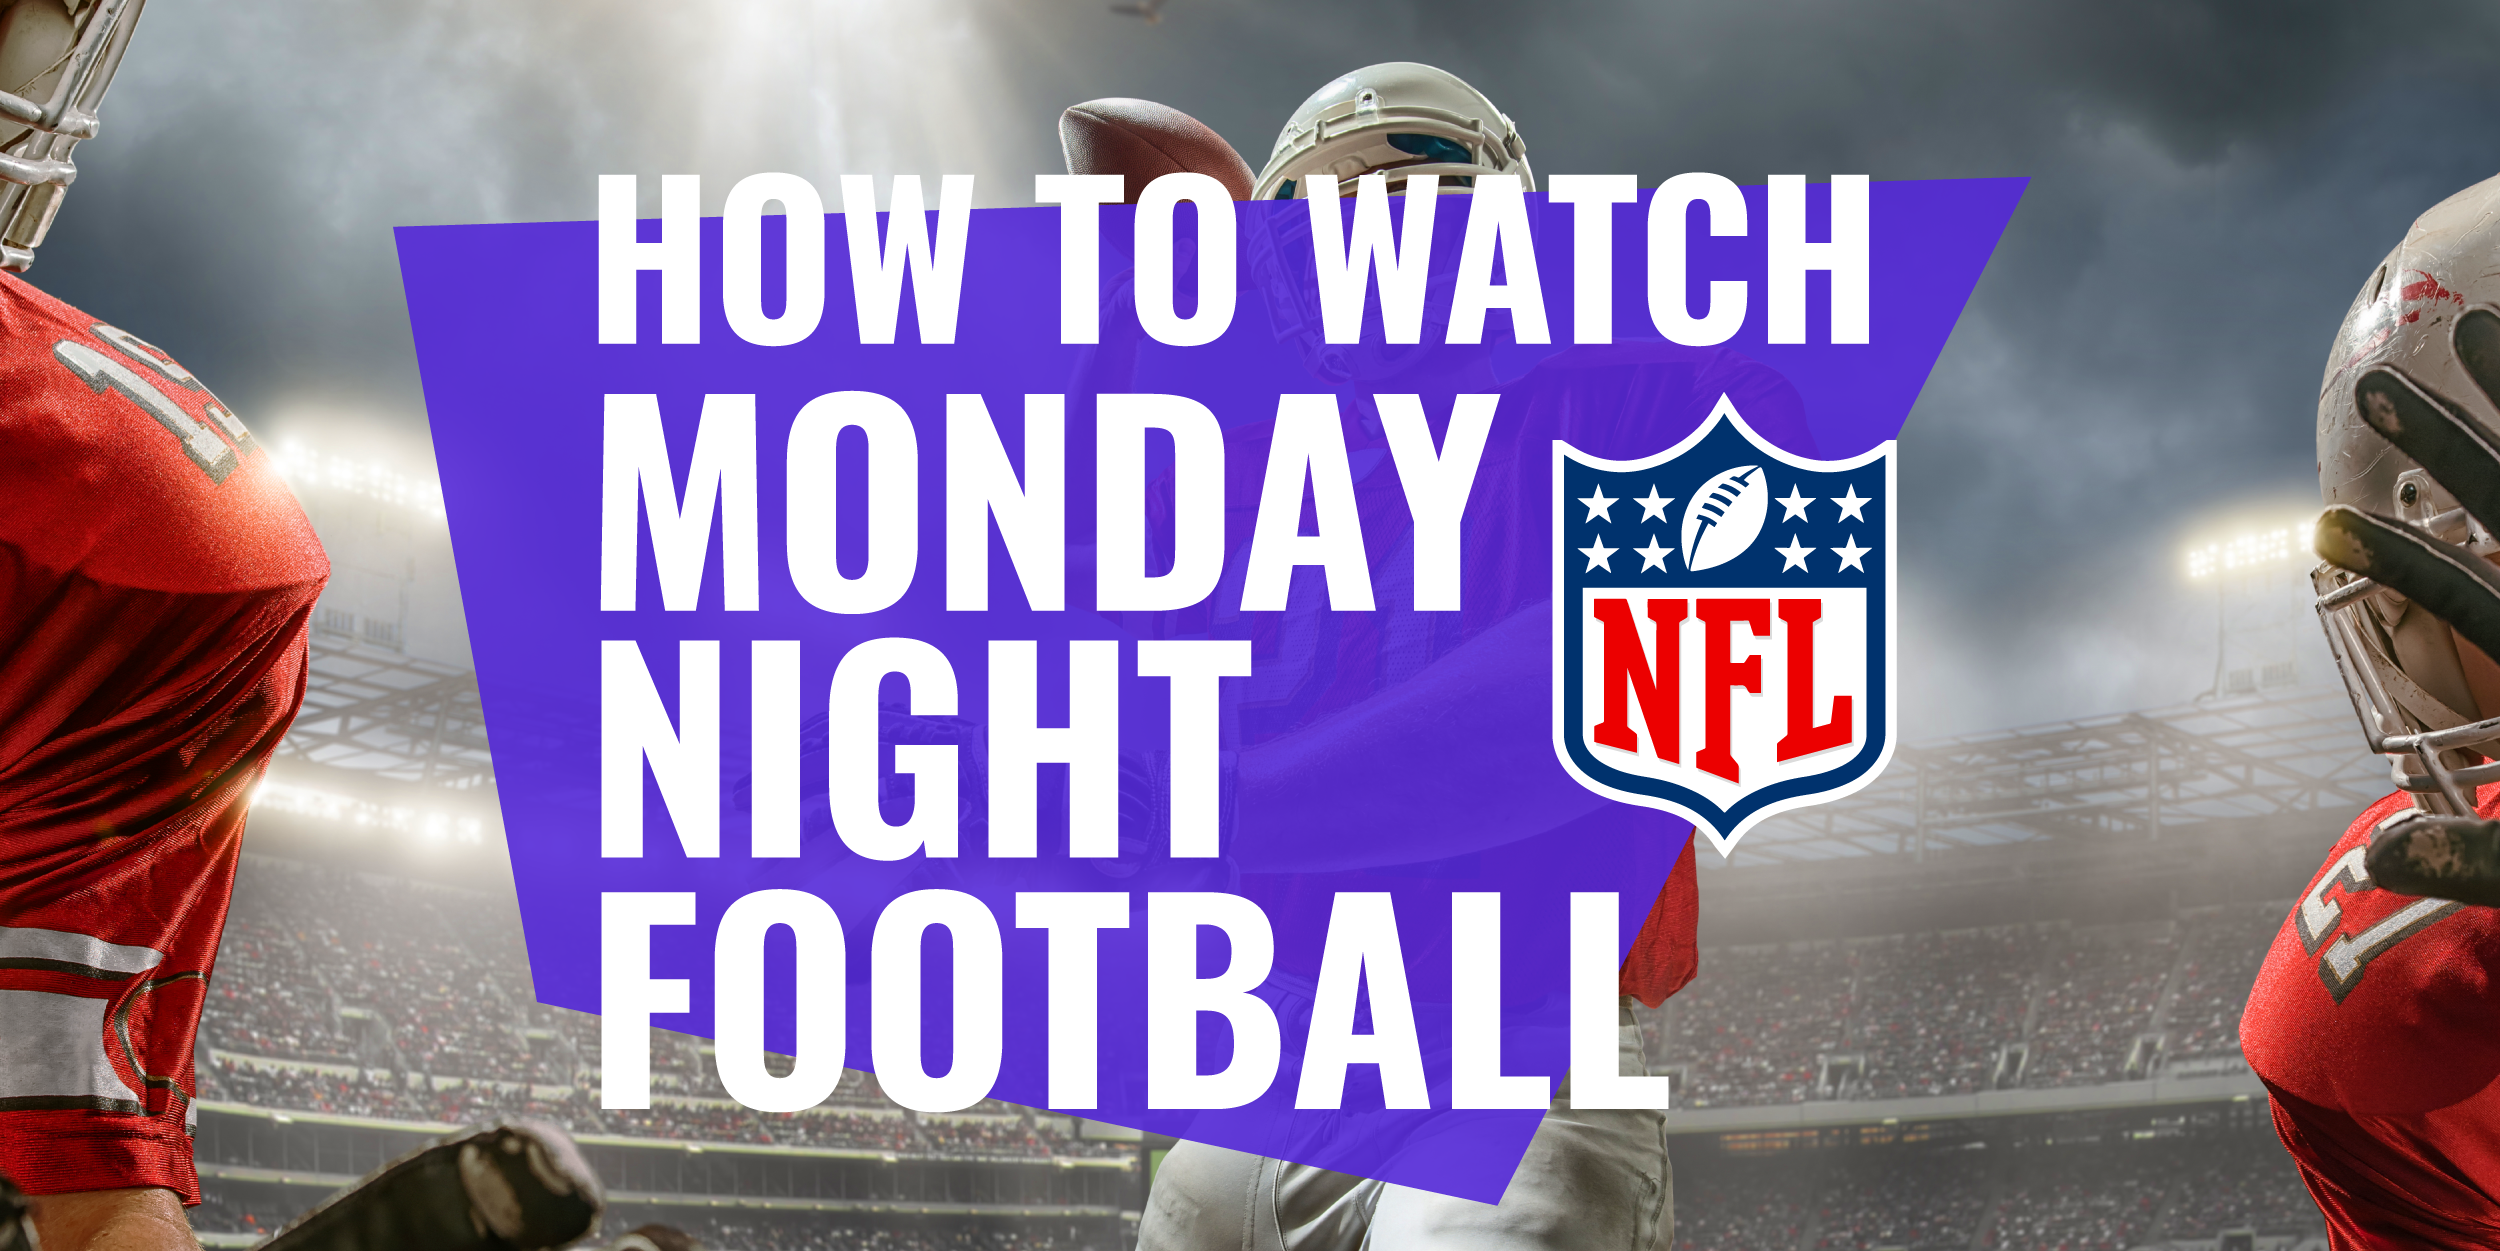 show the monday night football game